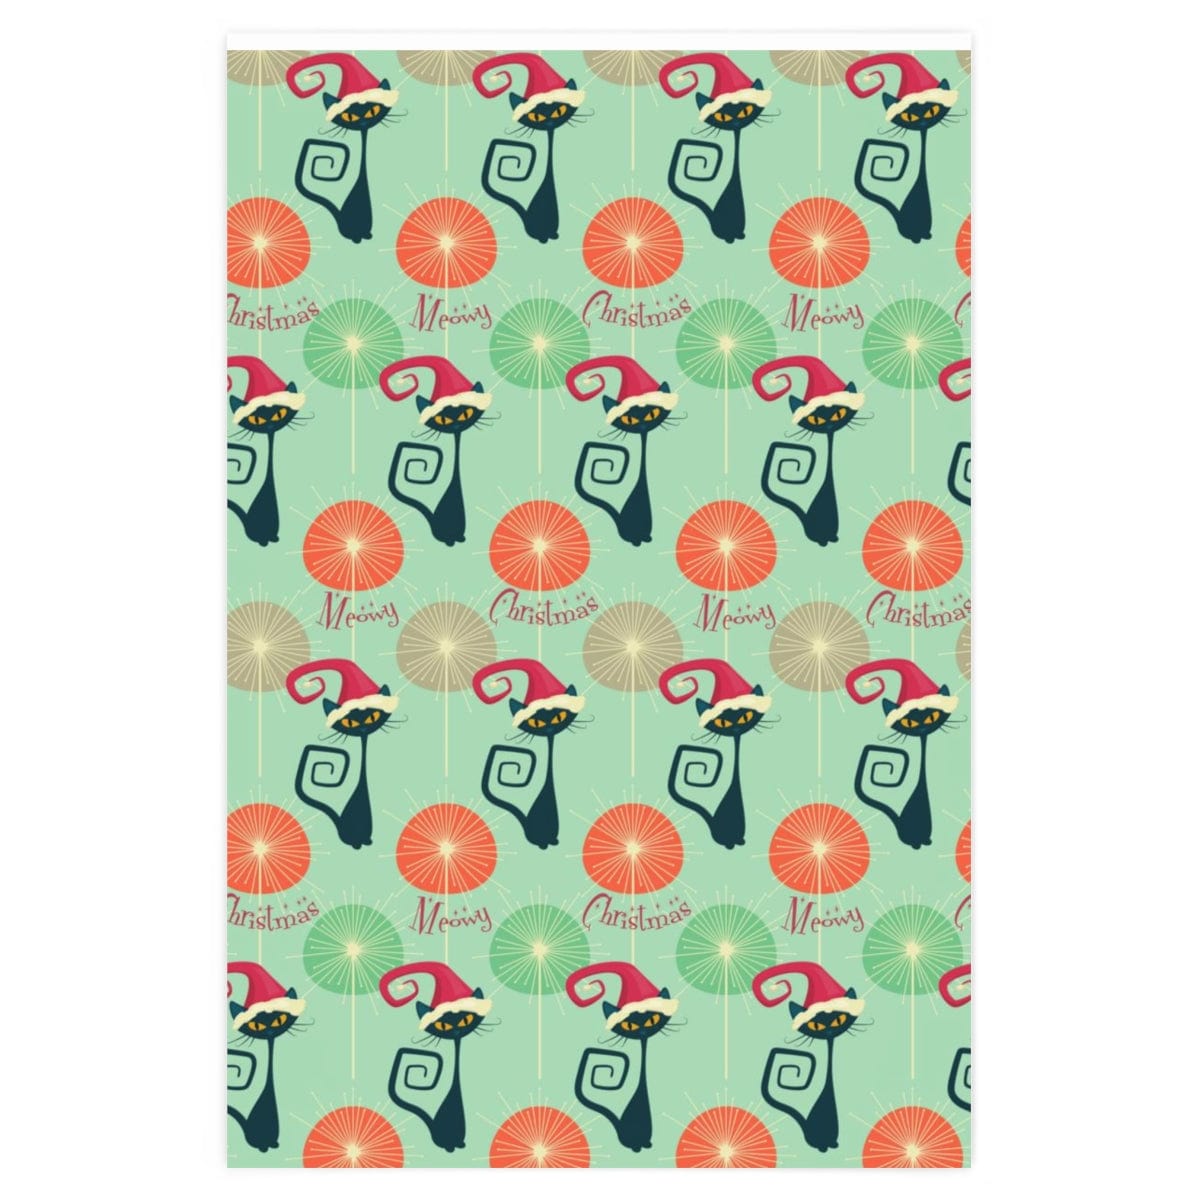 Kate McEnroe New York Atomic Cat Meowy Christmas Wrapping Paper Seasonal & Holiday Decorations